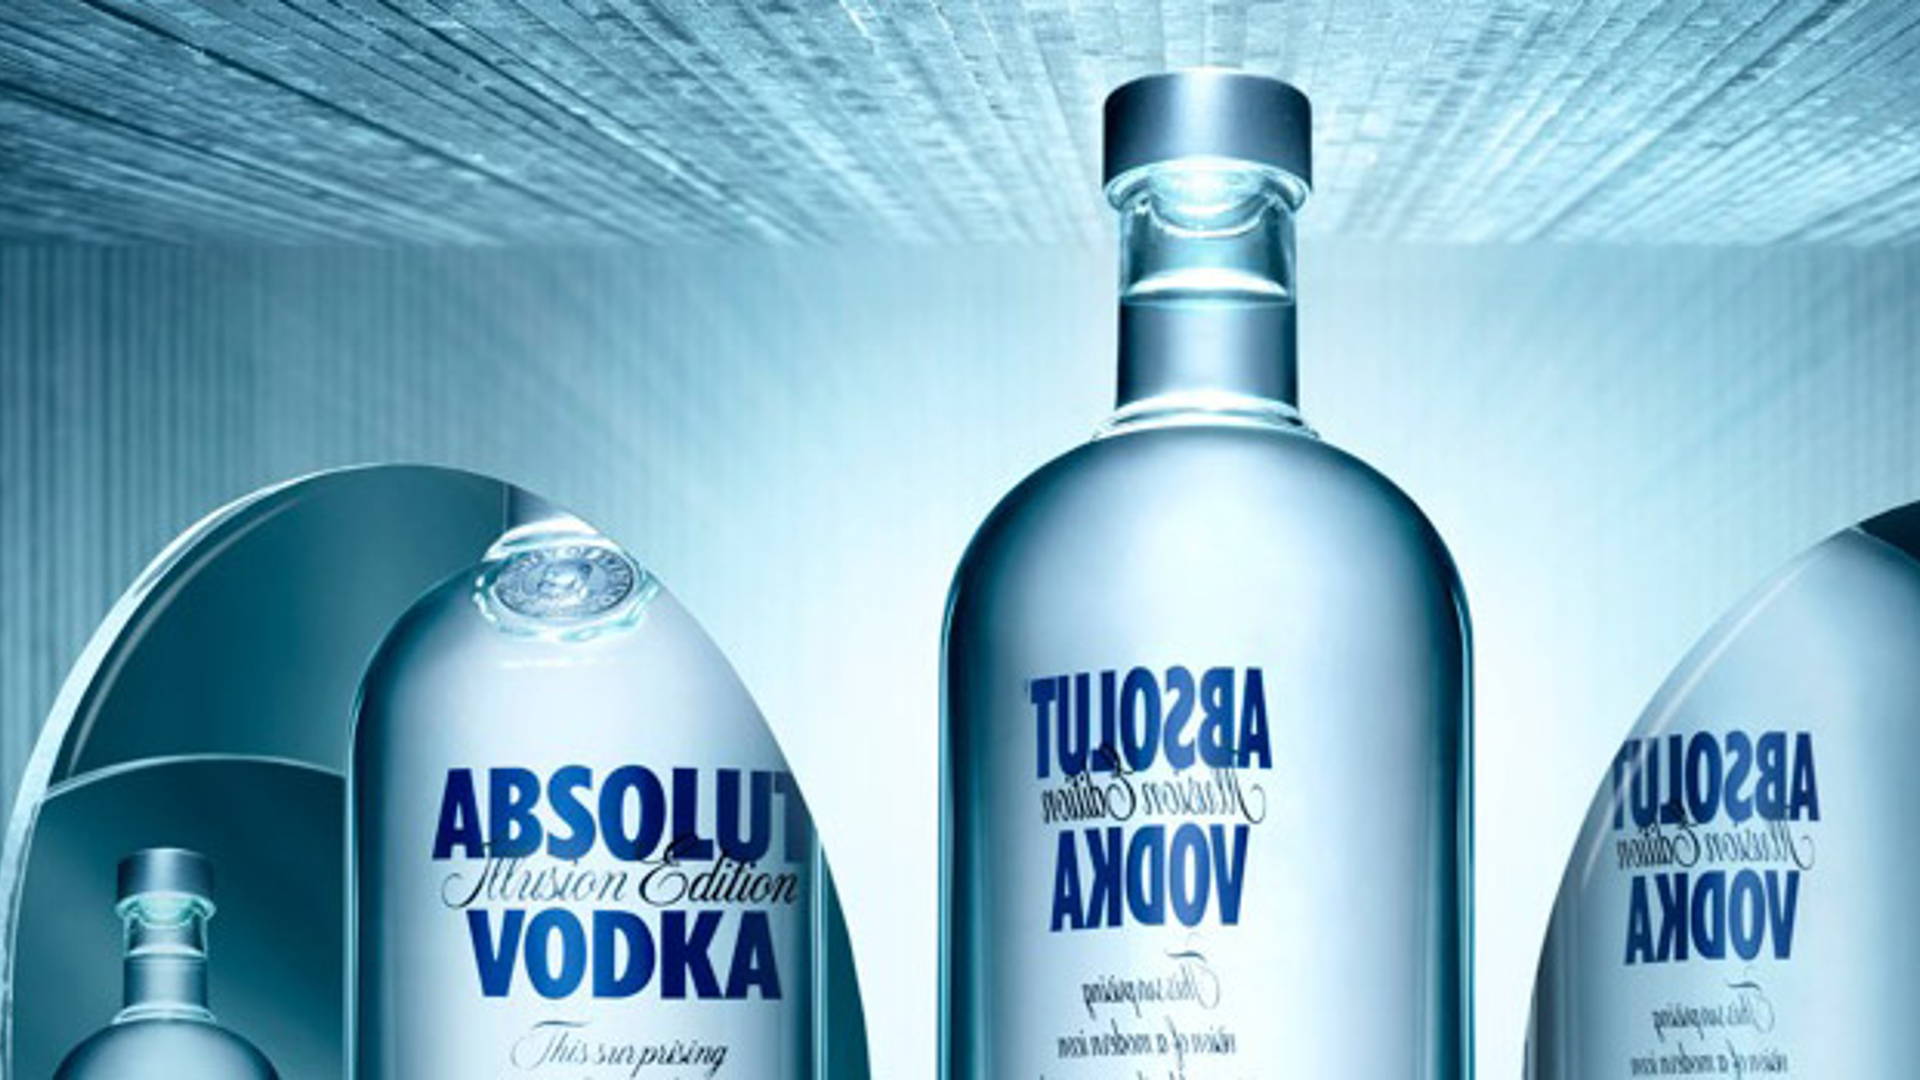 Featured image for Absolut Vodka Illusion Edition